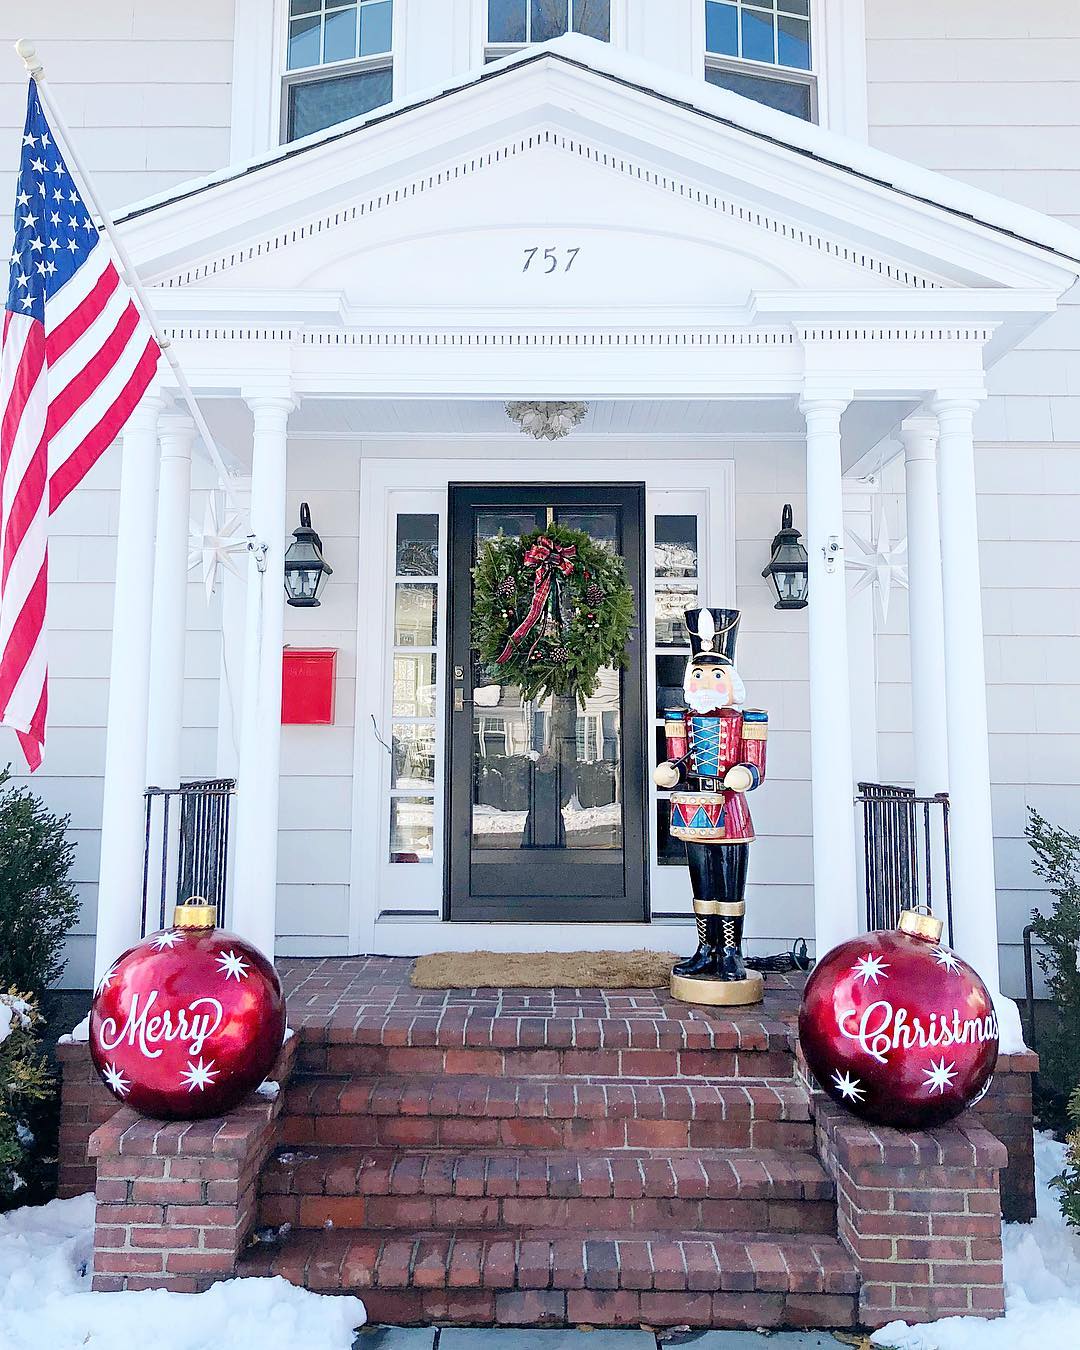 A front porch features two large DIY red ornaments saying "Merry Christmas" on either side. Photo by Instagram user @honeyandfitz.